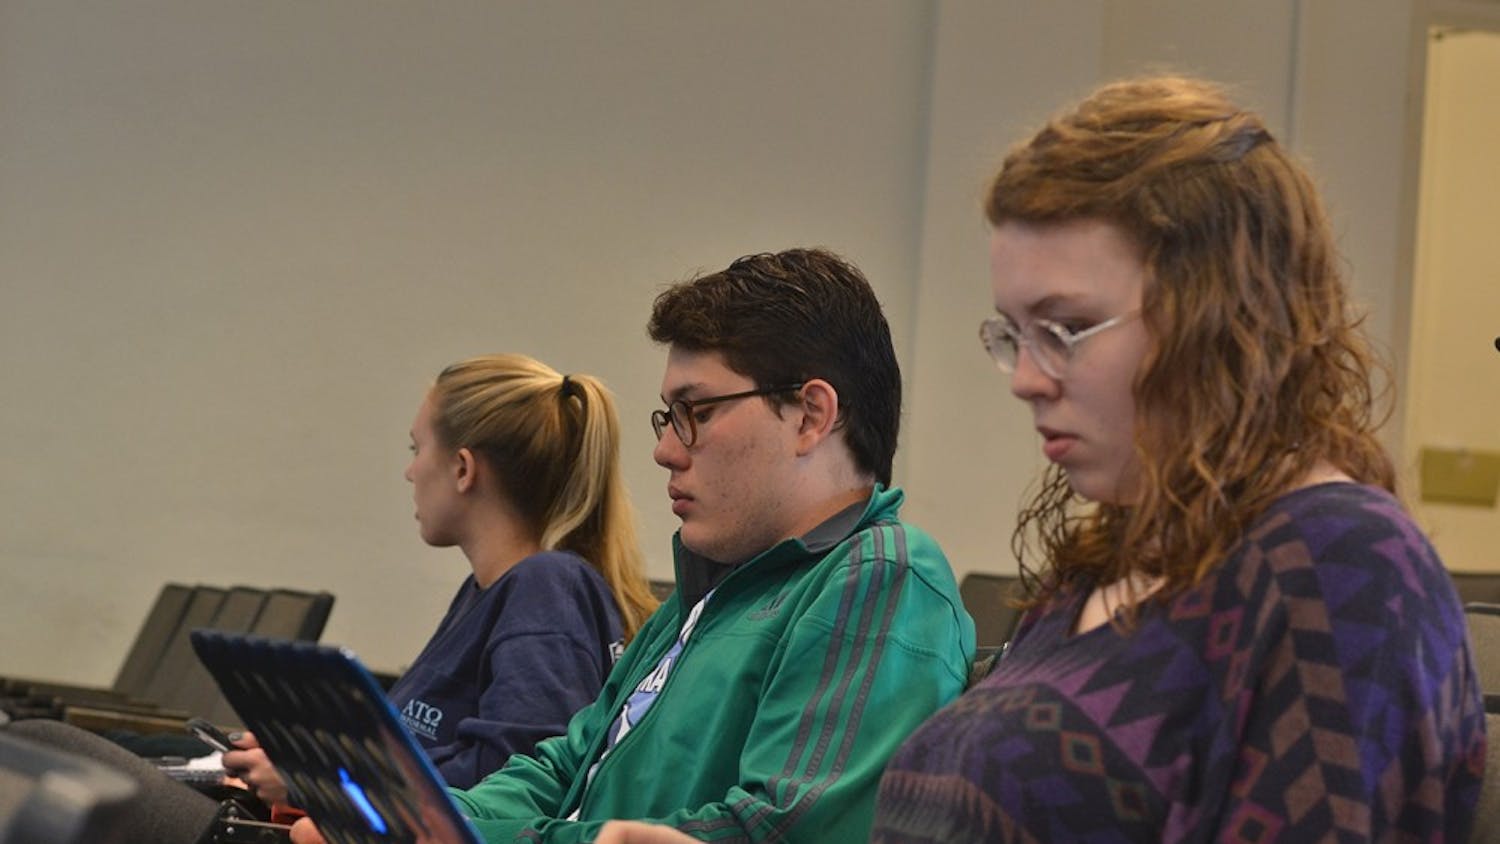 Saturday afternoon, Feb. 20, students gathered in Bingham for election protection training and to learn about primary polls. First-year Rebecca Price, sophomore Sebastian Hibbard, and junior Amanda Nunn sit among the other voters.